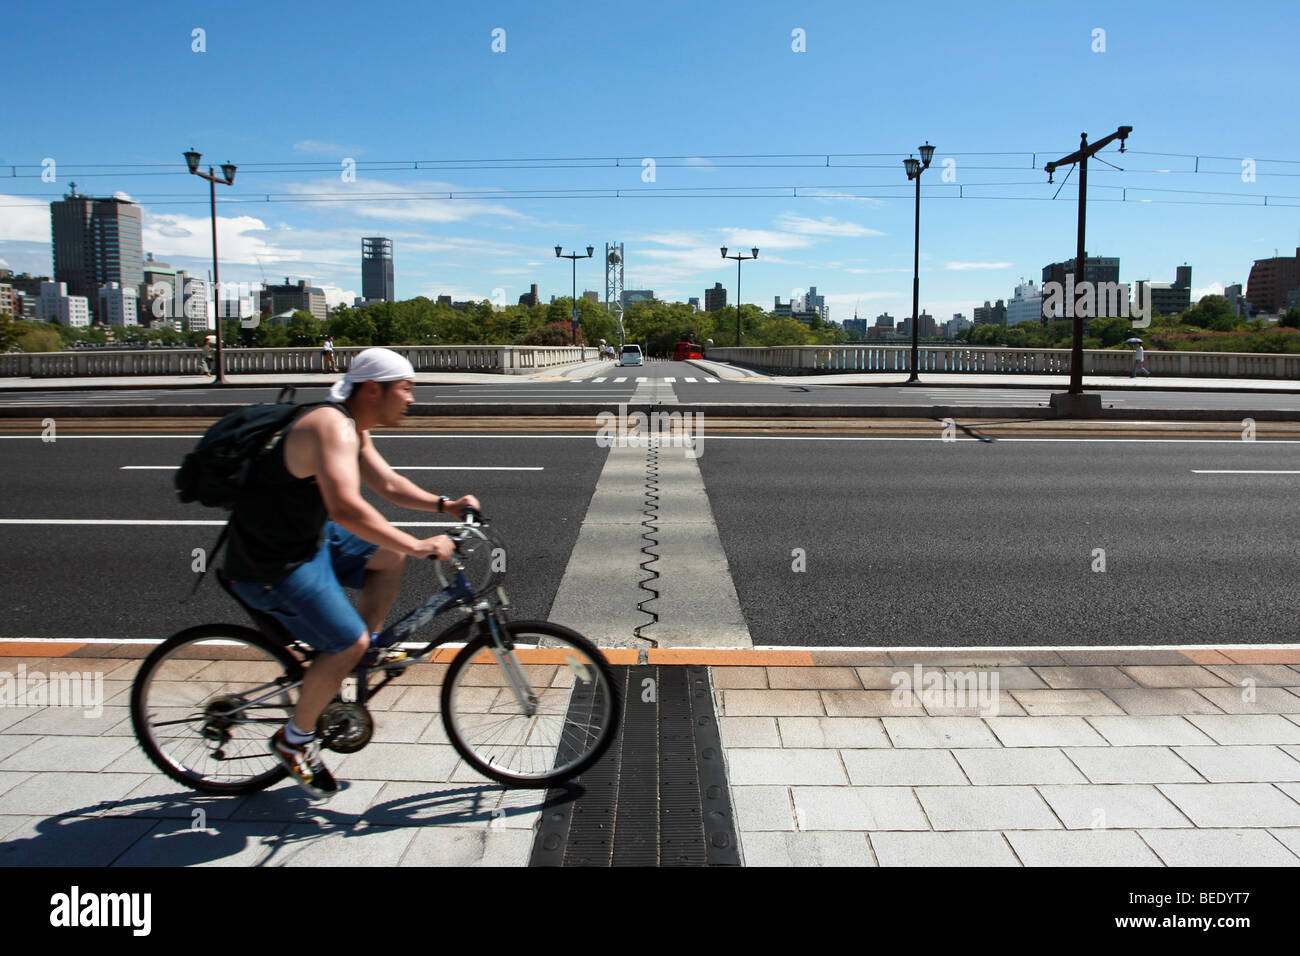 A man cycles over the Aioi bridge in Hiroshima, Japan, which was the target for the first Atomic Bomb 64 years previously. Stock Photo